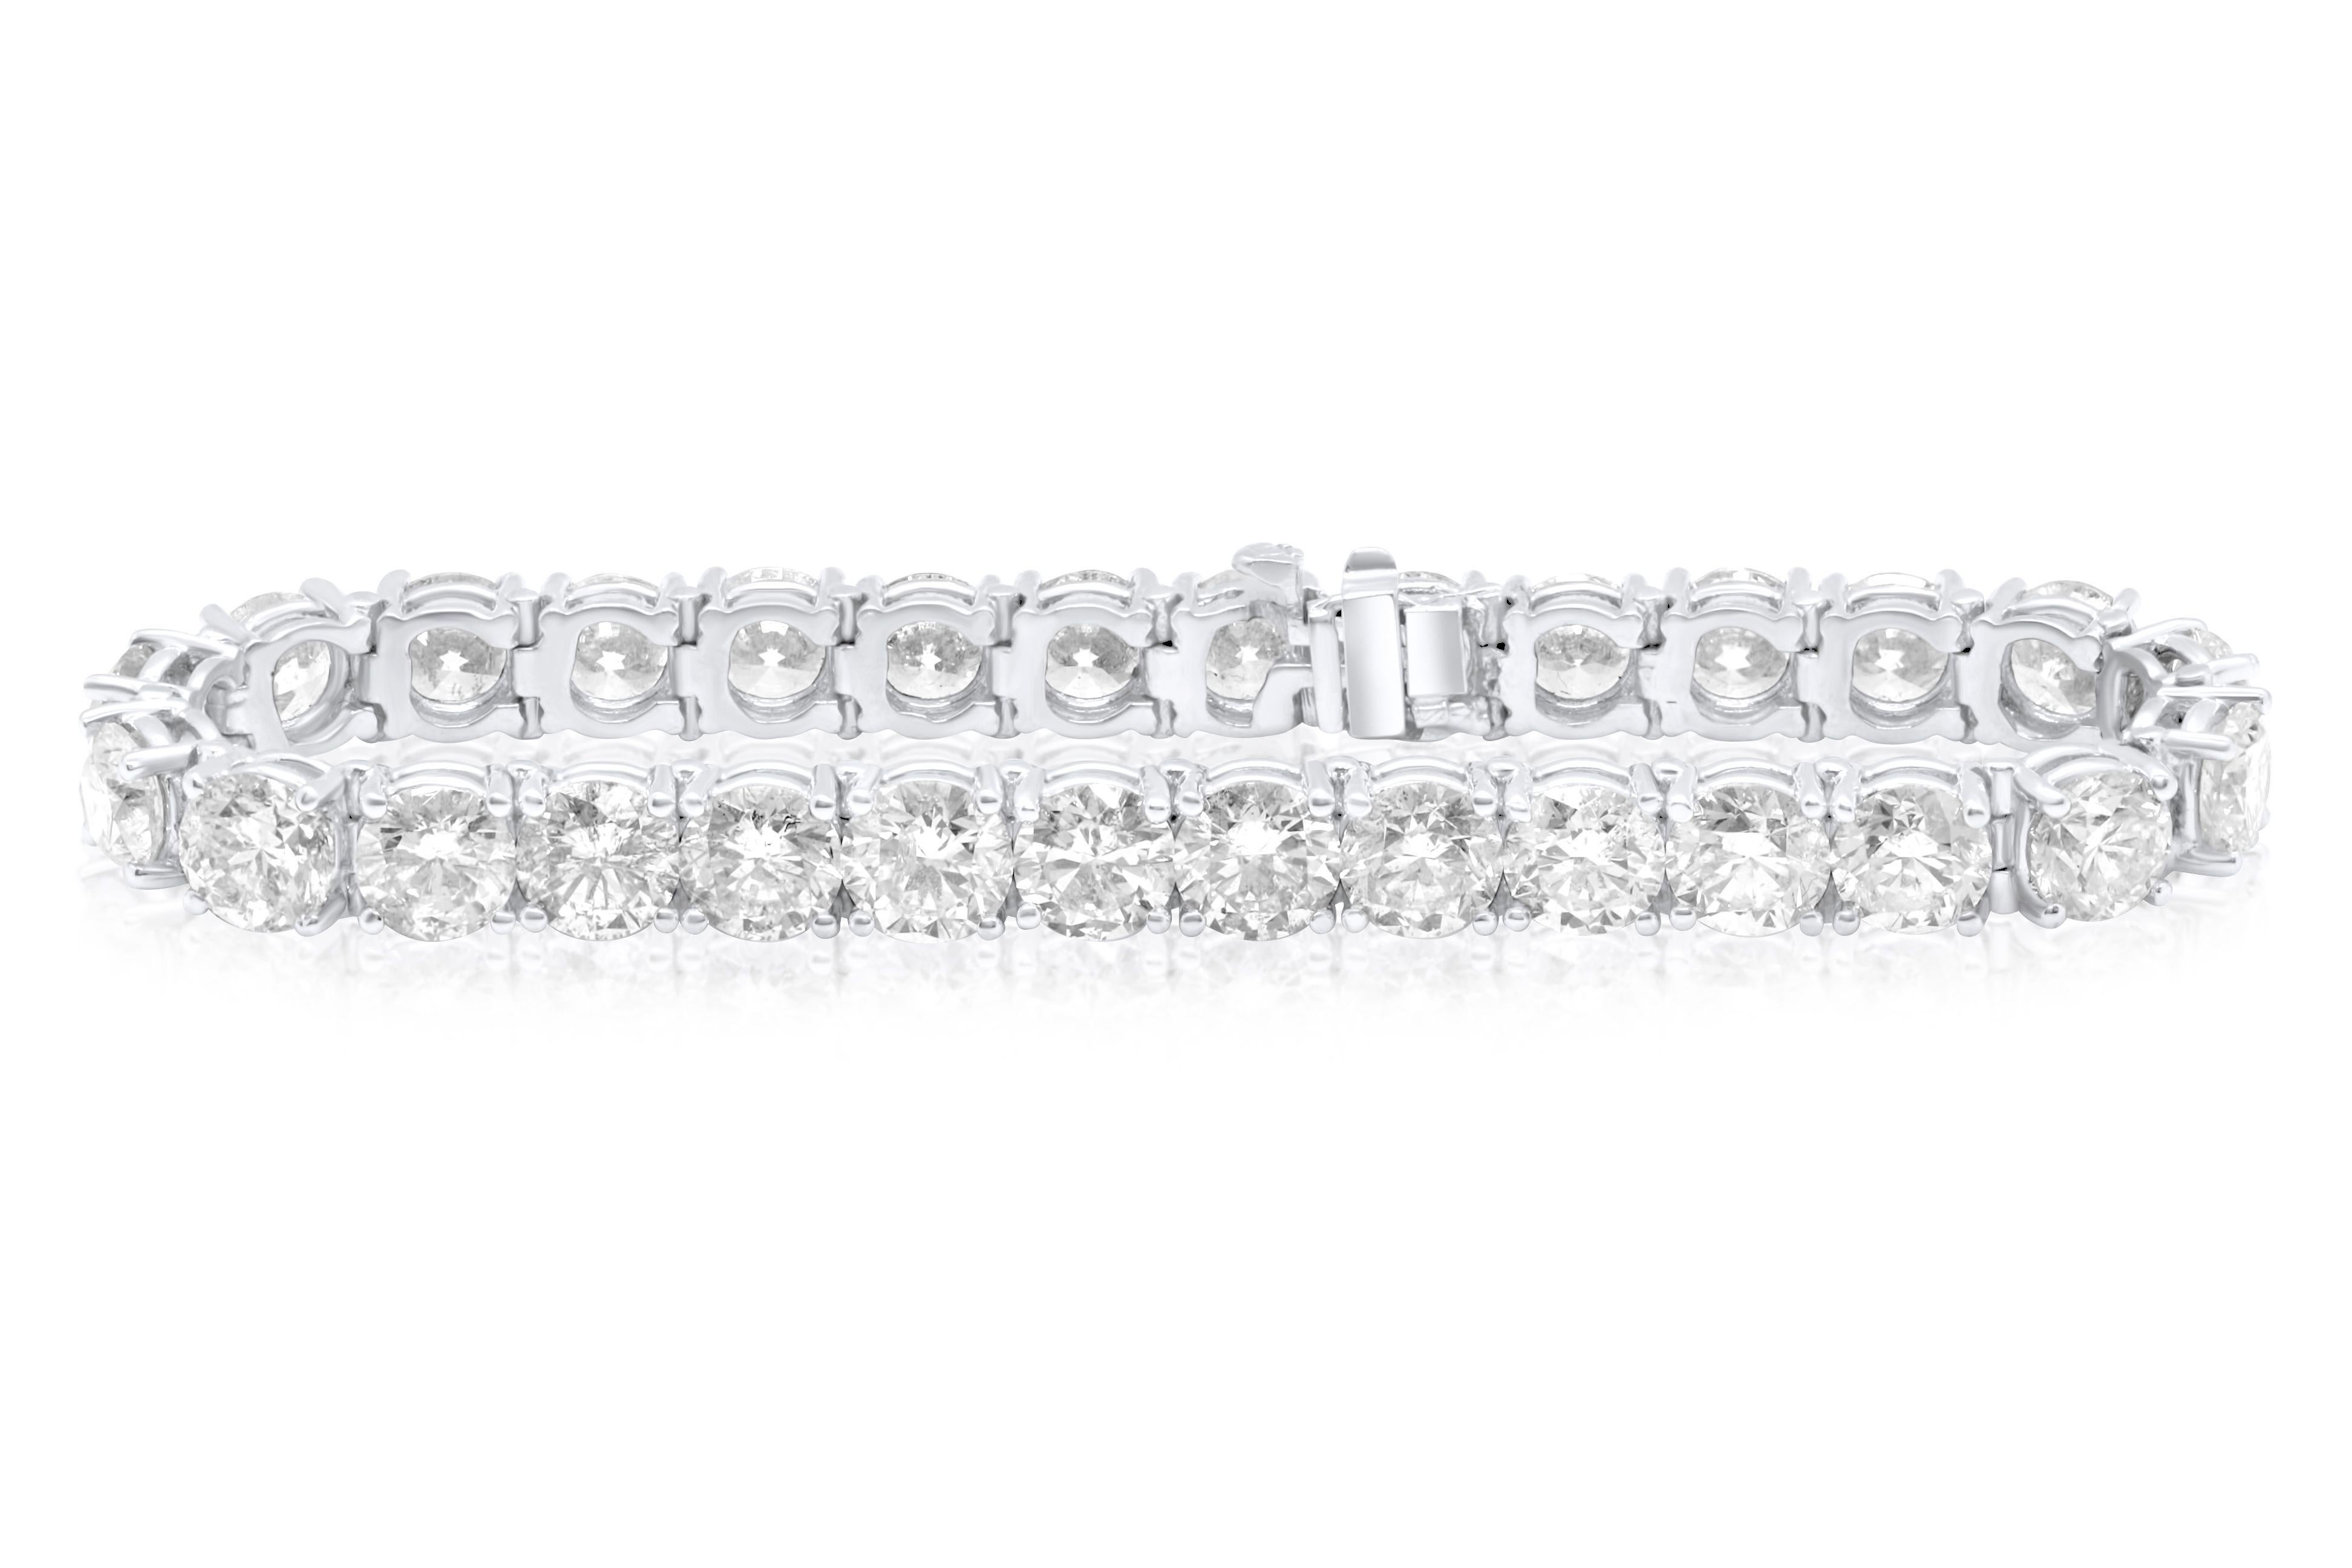 18K White Gold diamond tennis bracelet, set in a classic four prong diamond mounting. 
Total diamond weight is 27.87 Carats of Ideal Brilliant Cut Diamonds. 
Near colorless white in color, slightly included